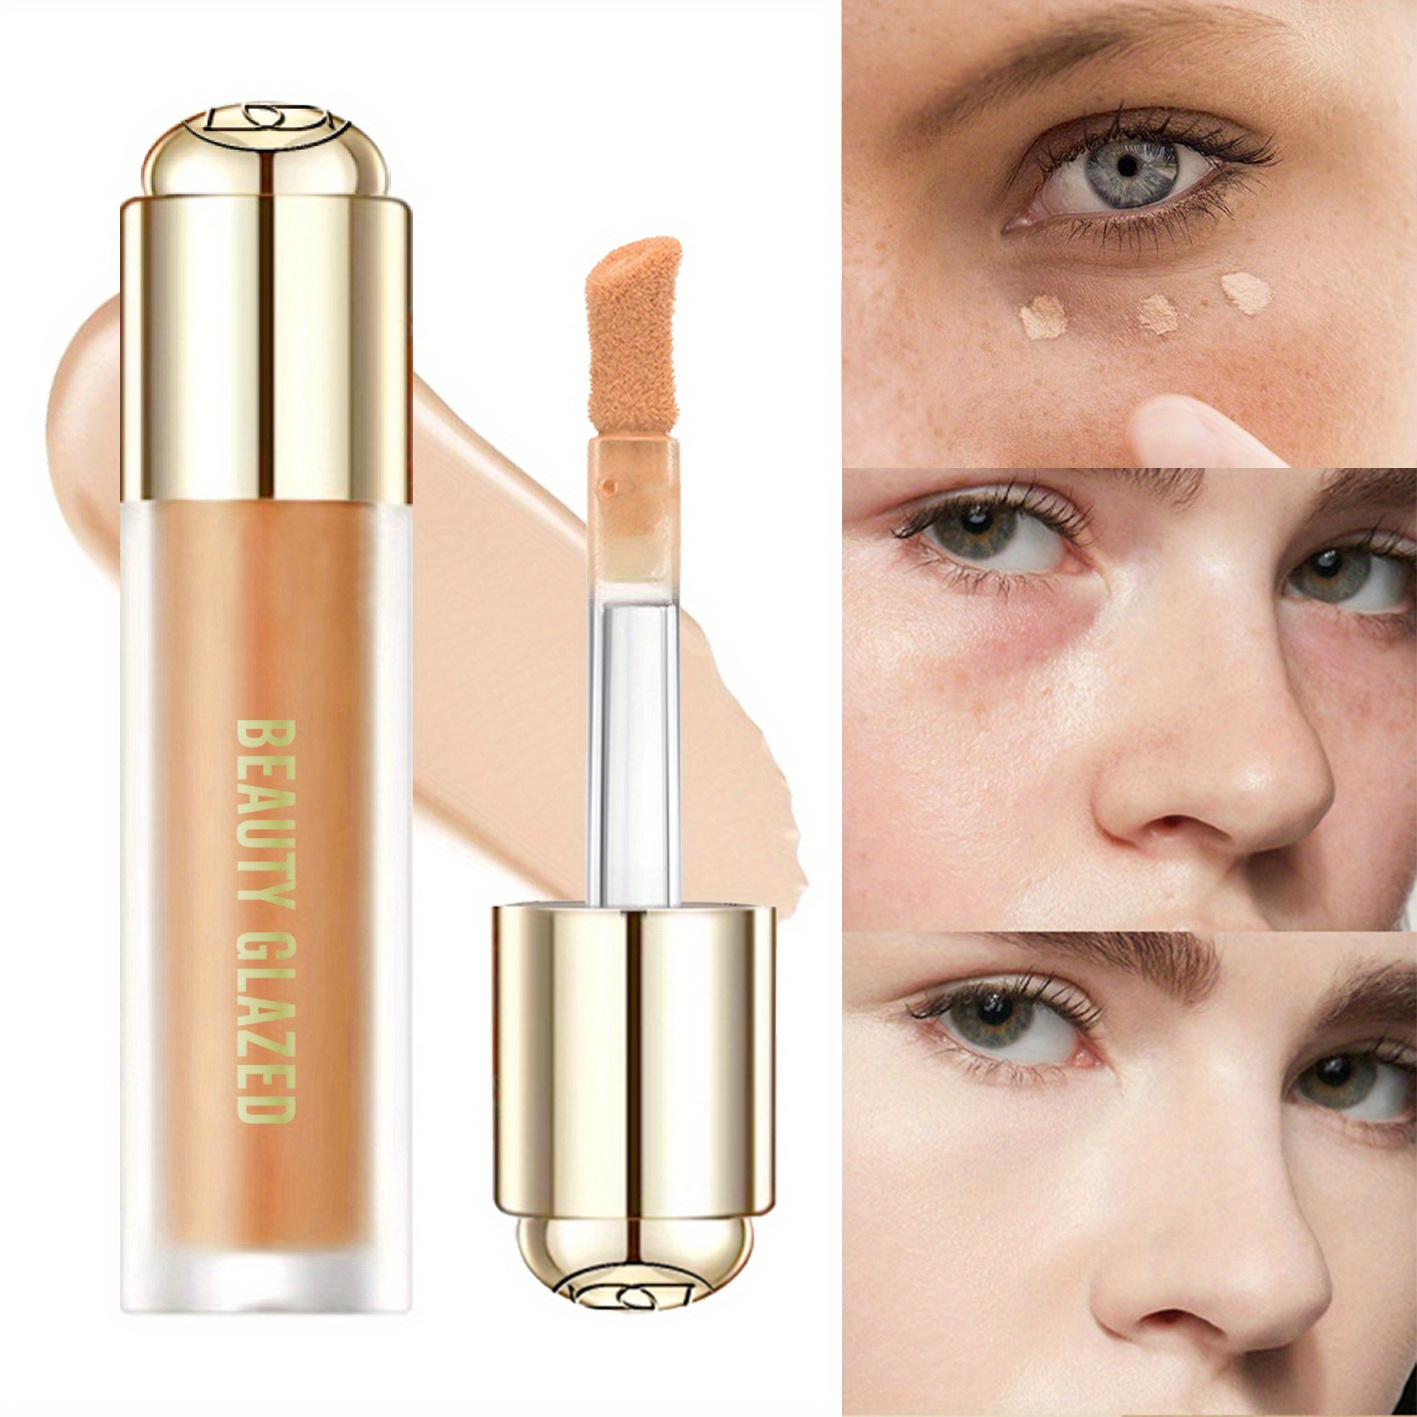 

Matte Long-lasting, Multi-functional And Powerful Eye Concealer In Multiple Colors, Nourishes The Skin And Comprehensively Covers Dark Circles And Facial Blemishes